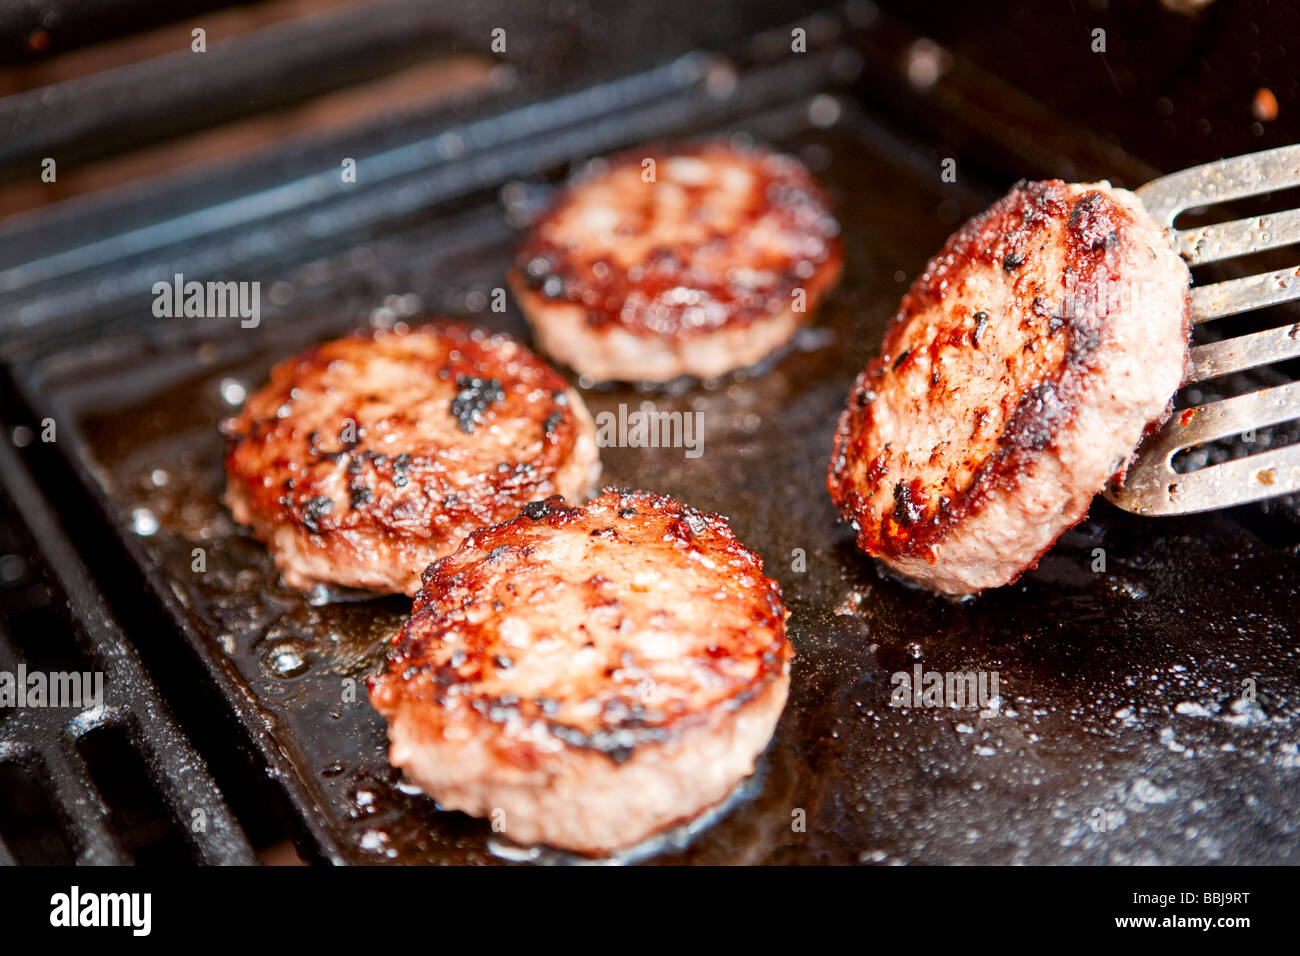 Burgers cooking on a barbecue selective focus Stock Photo